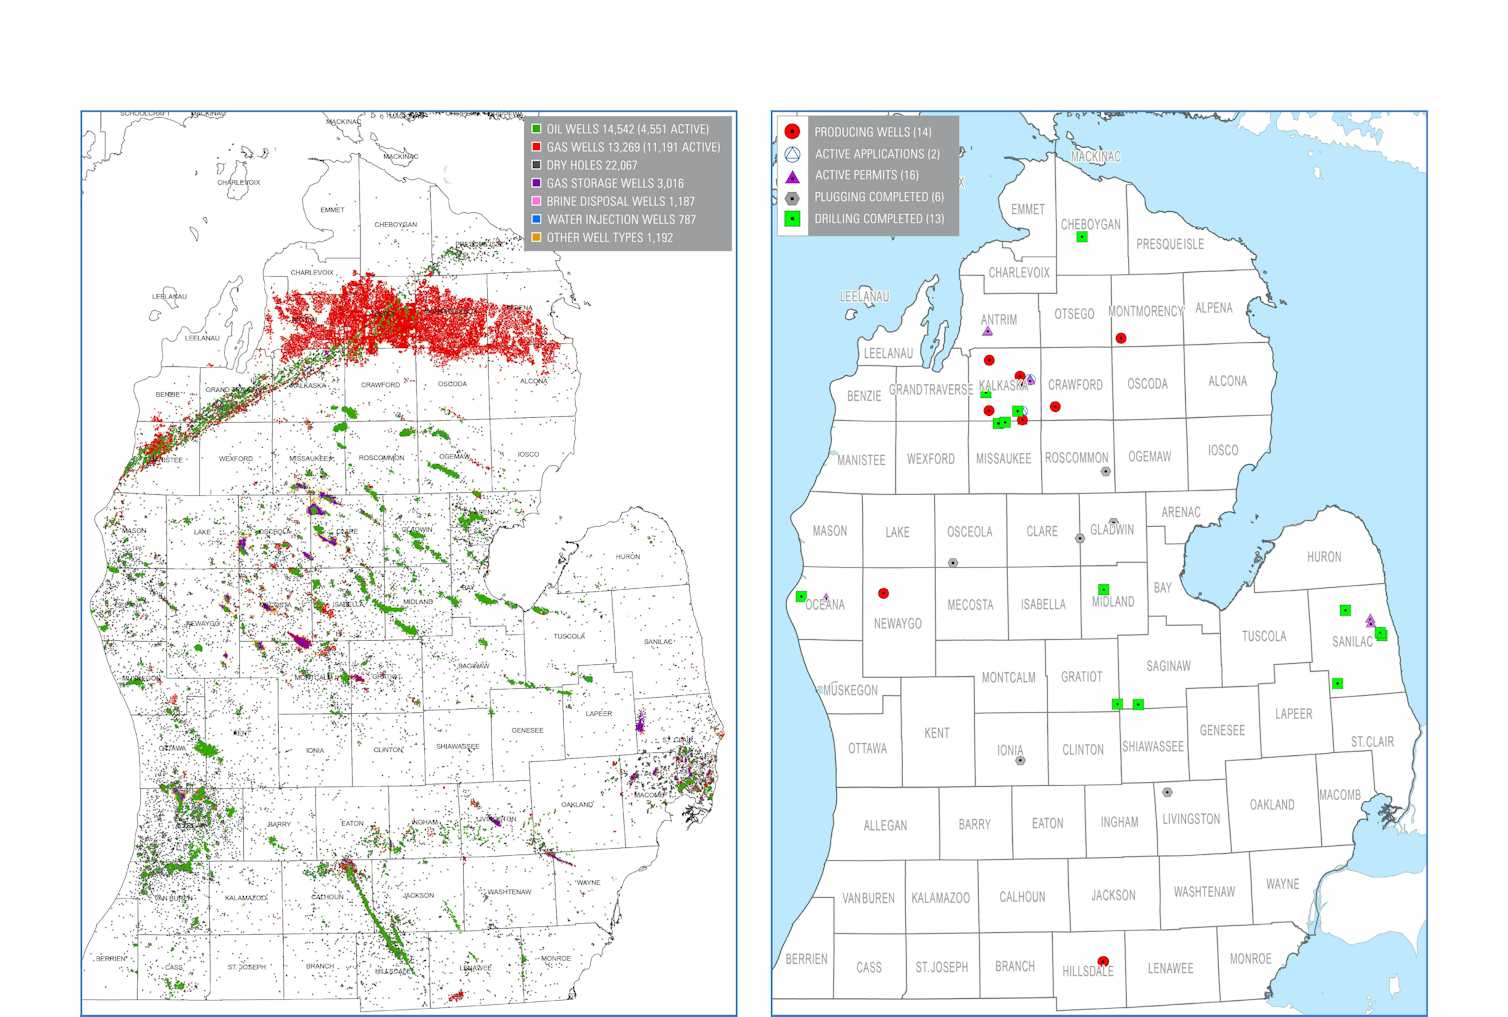 Learning From Others Michigan Considers Best Options For Future Fracking 7137